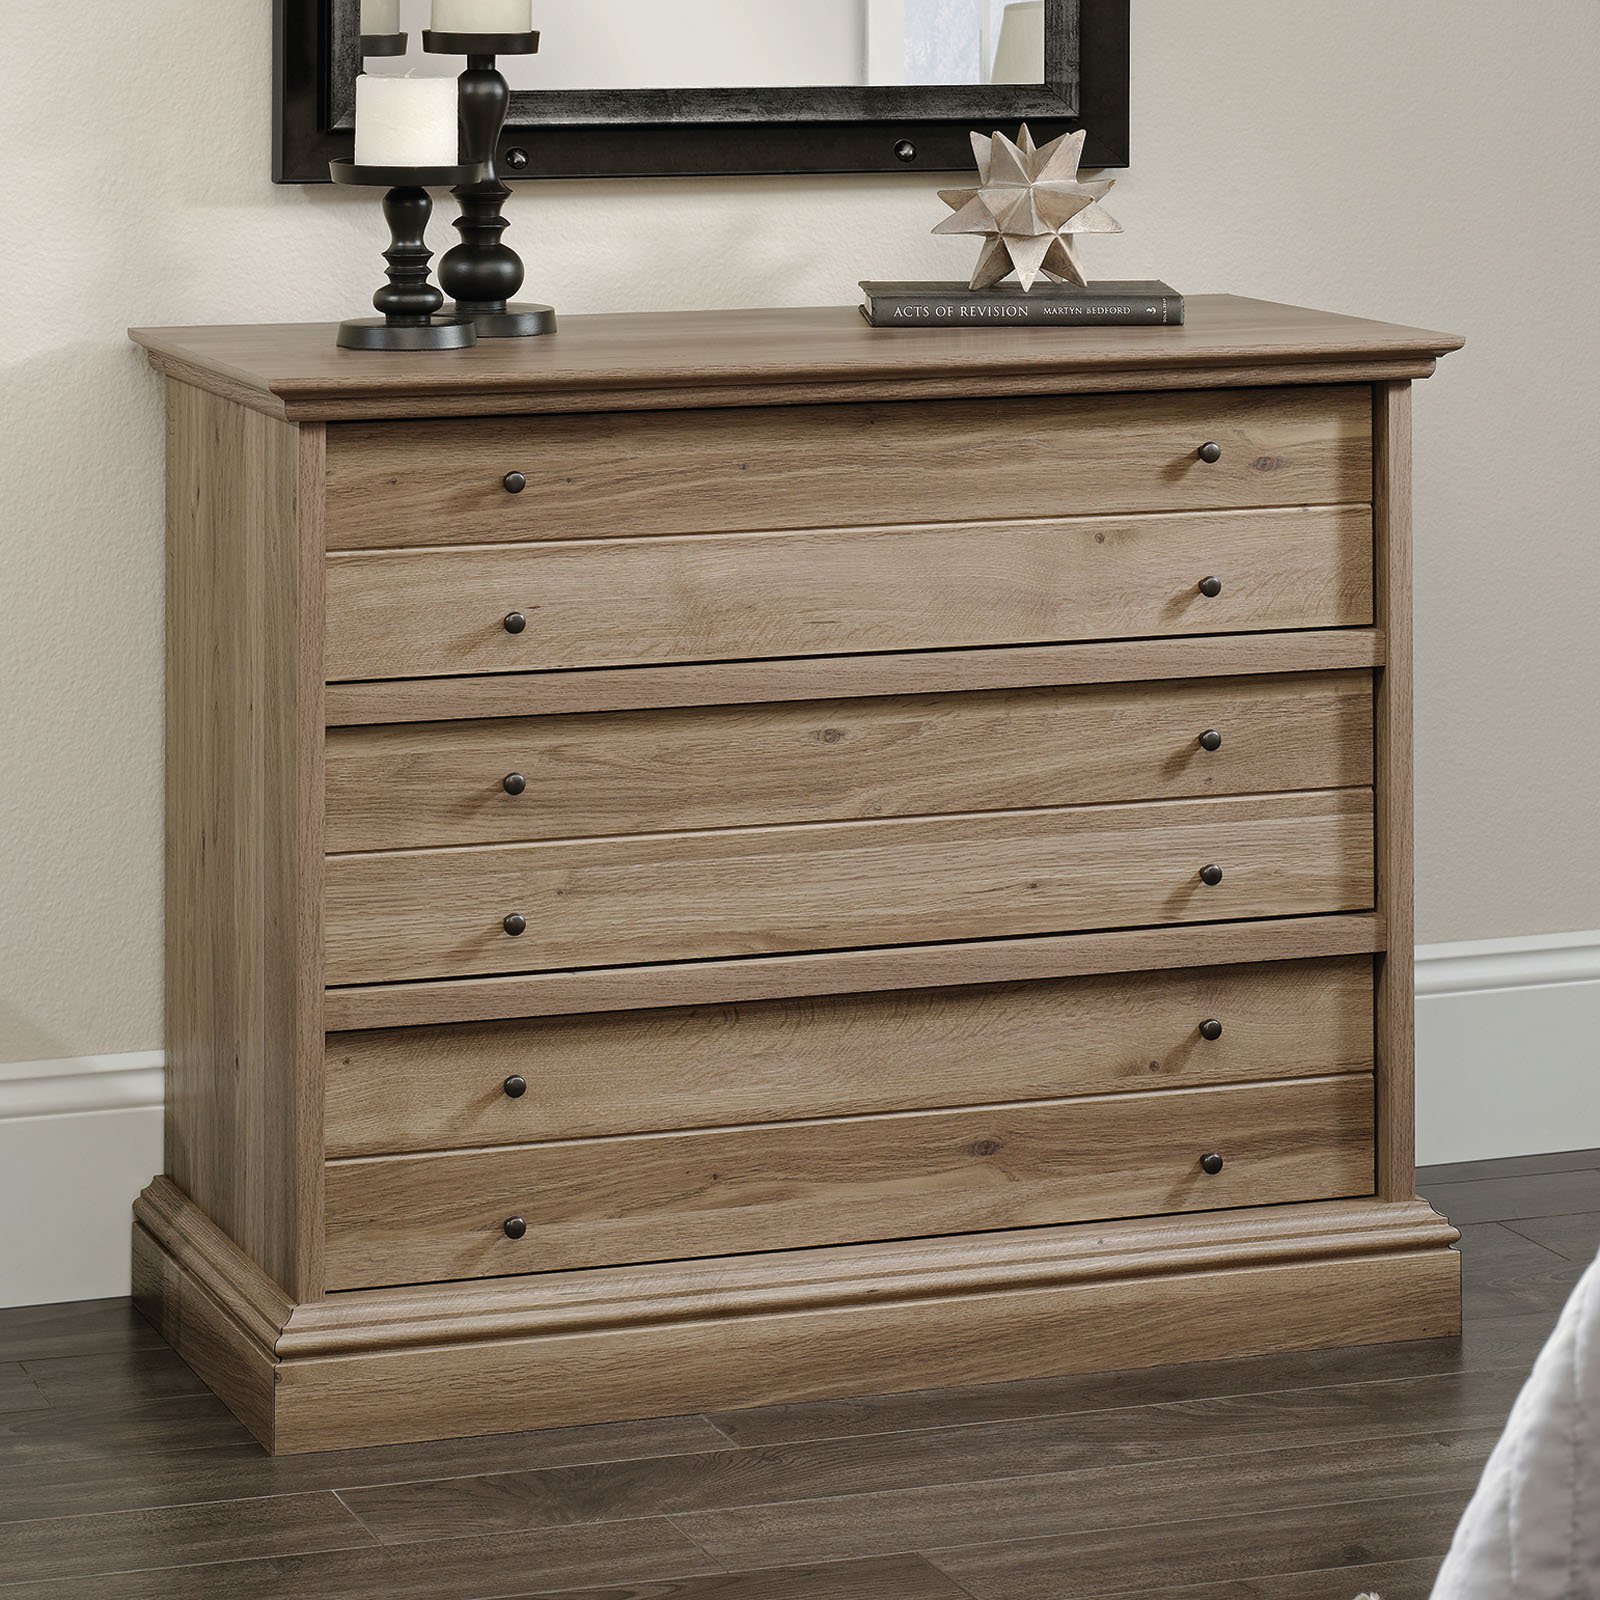 Extra Long Dresser With Deep Drawers 2021